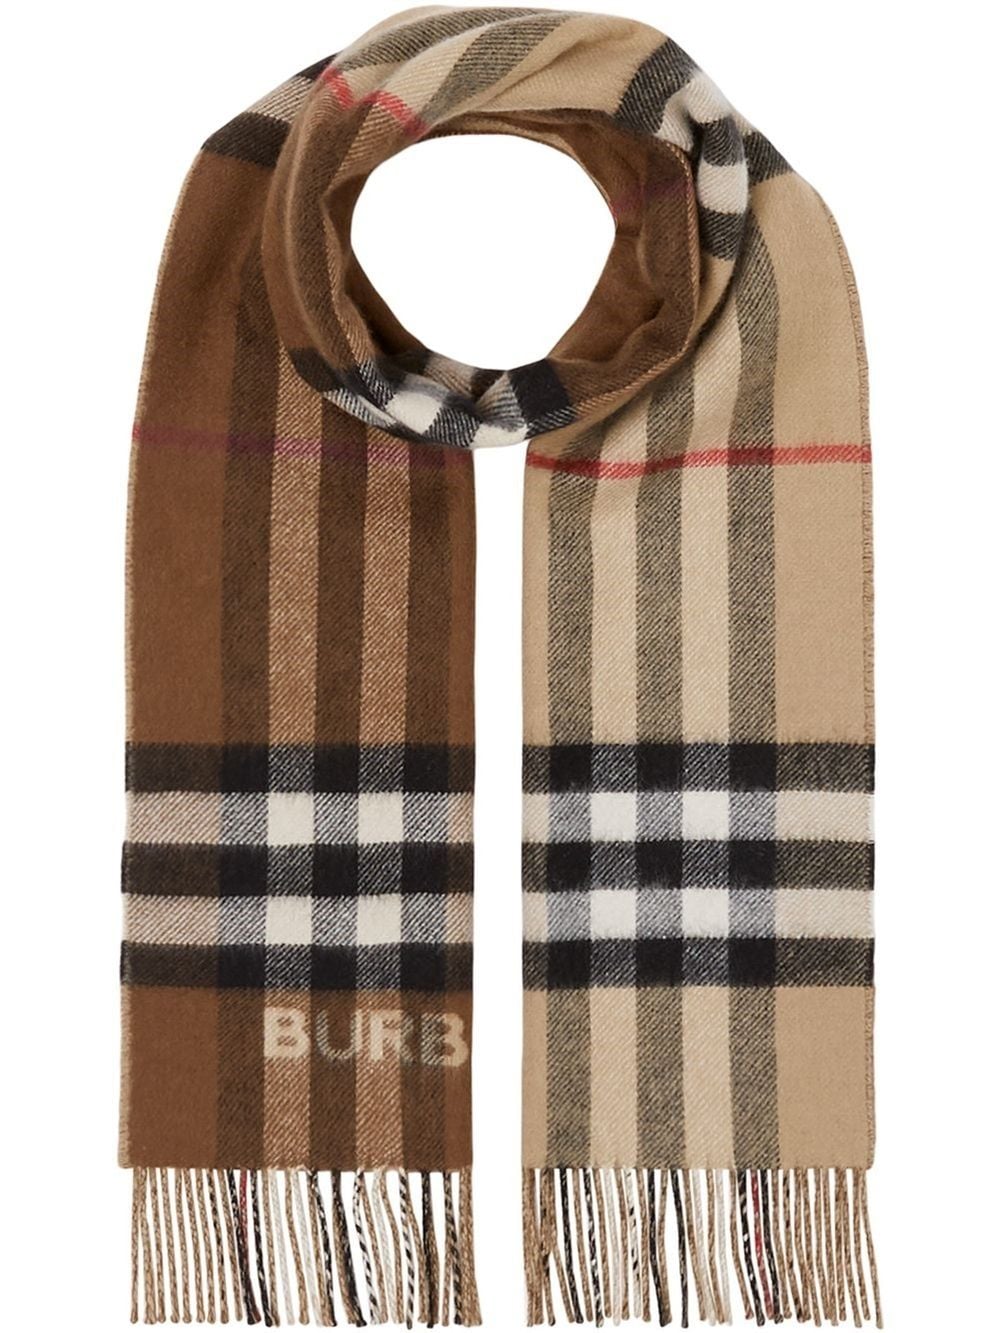 Burberry Double-Printed Monogram Silk Scarf - ShopStyle Scarves